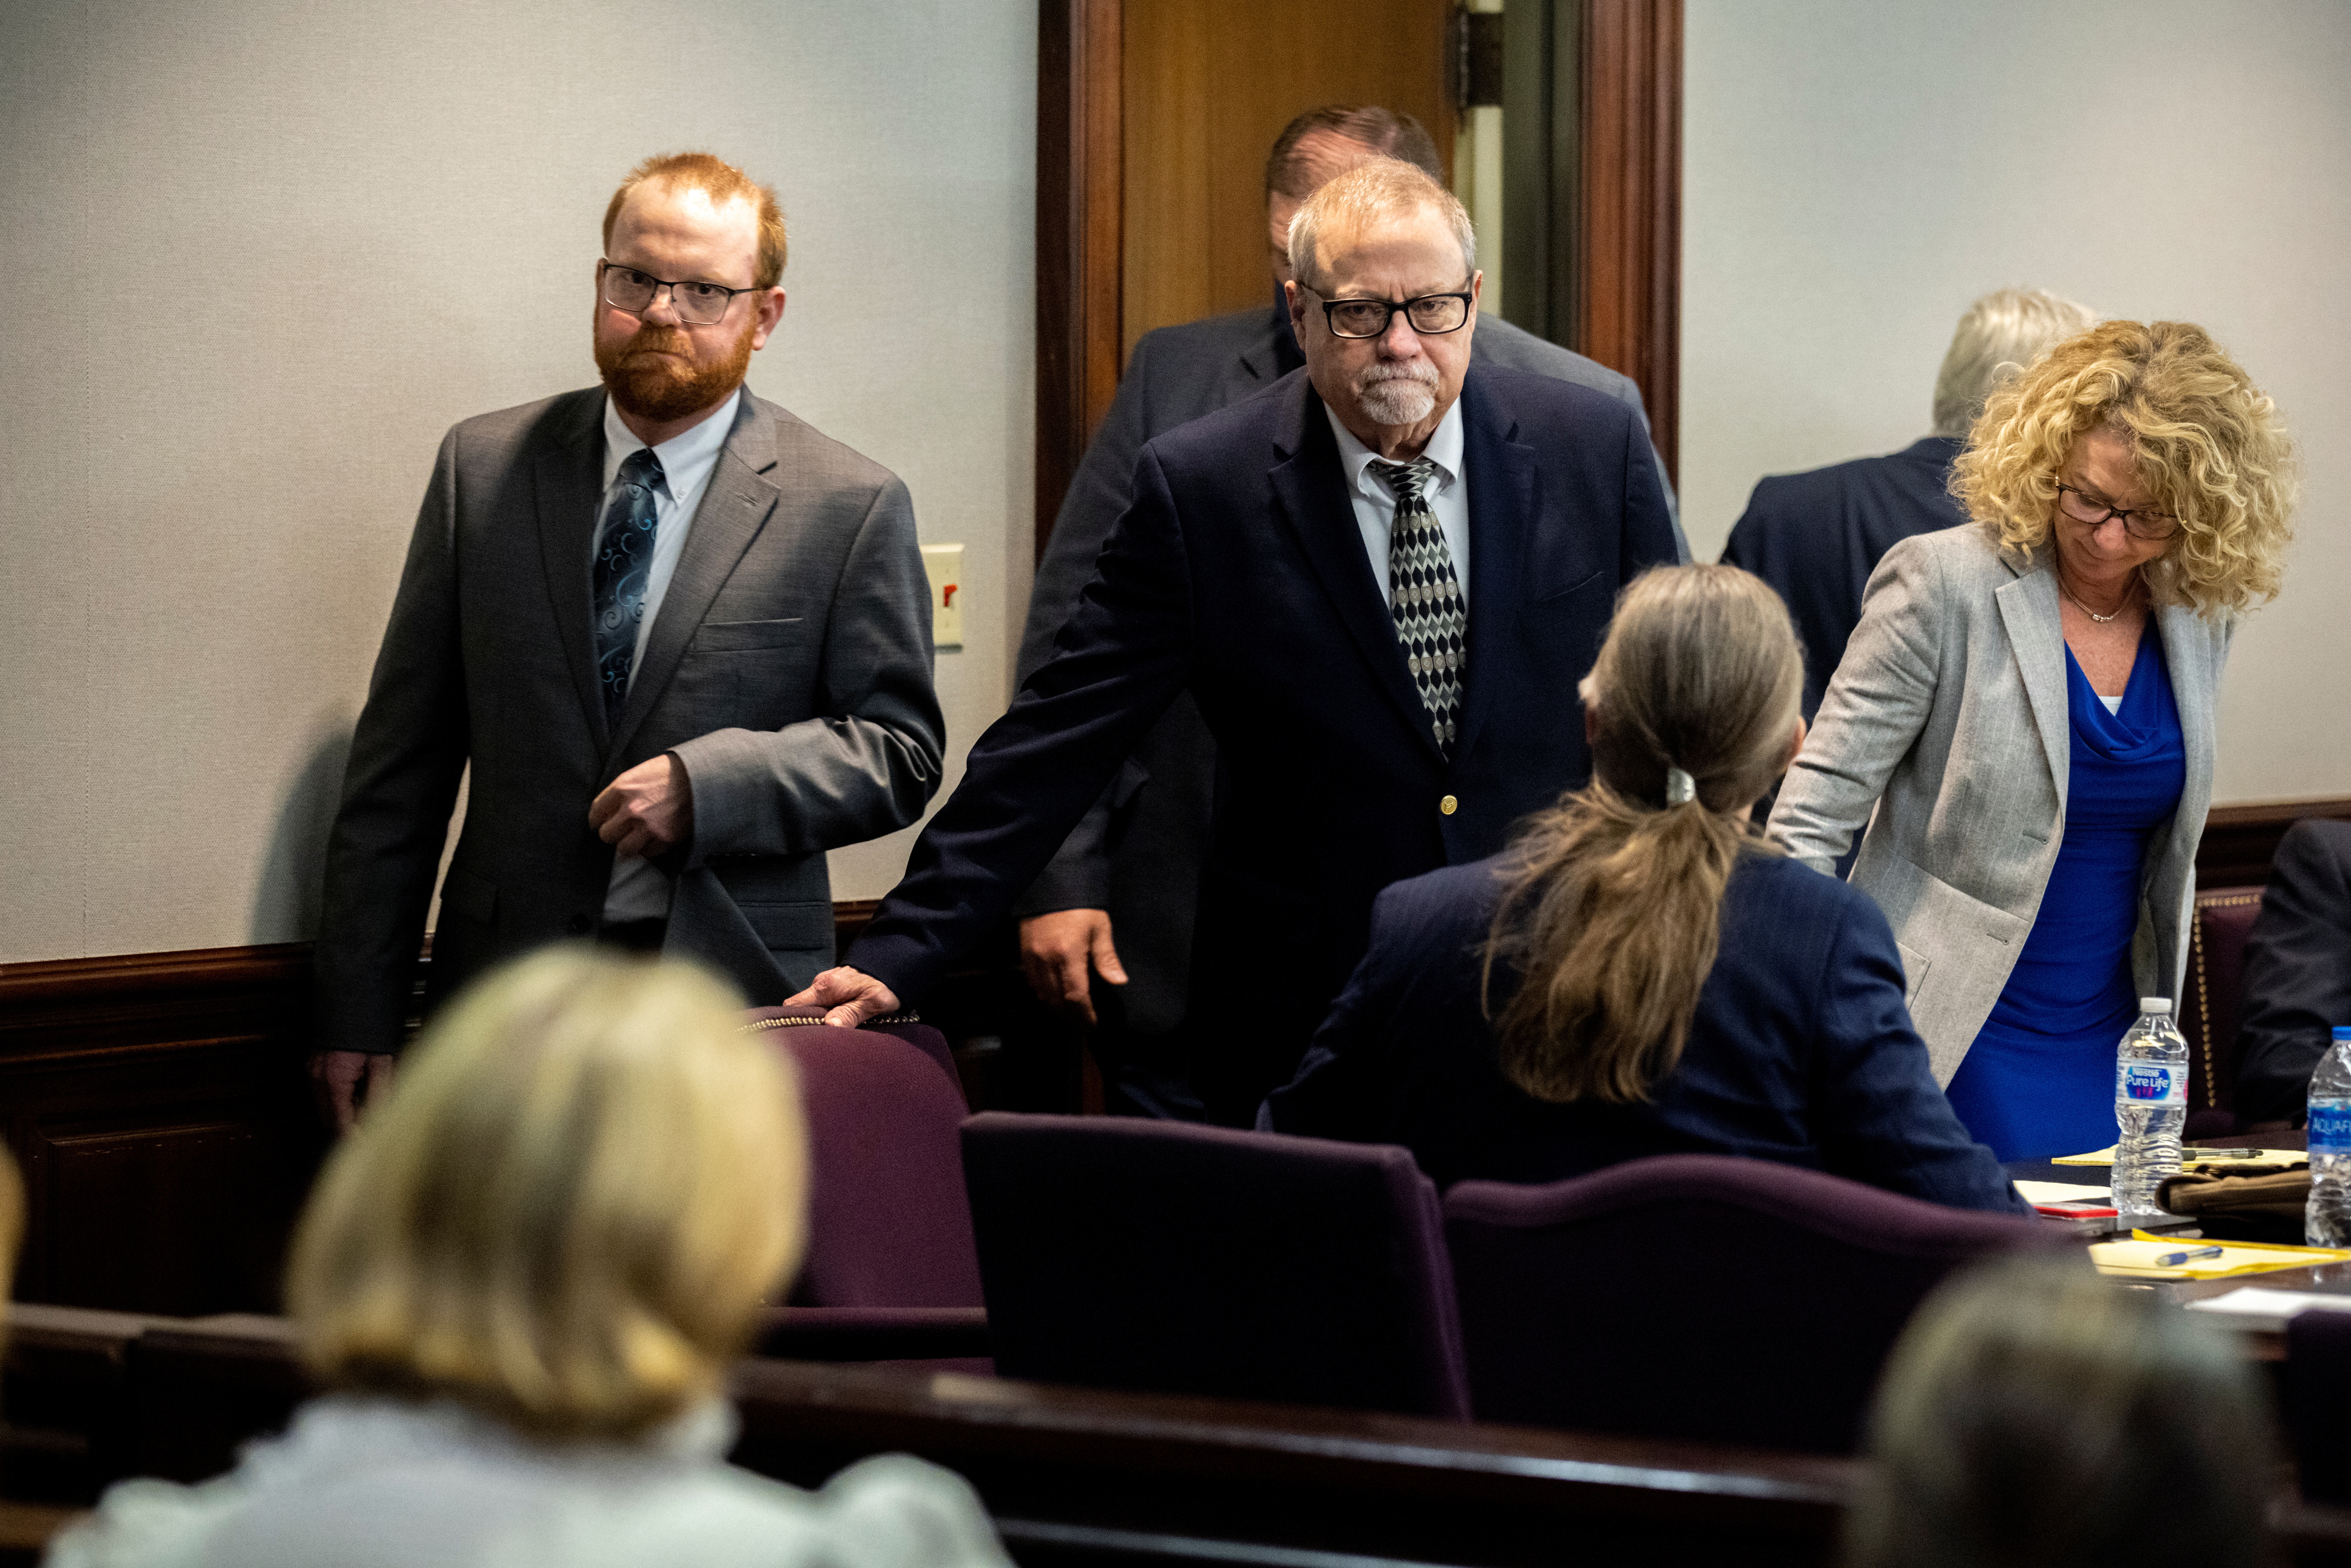 Greg McMichael and his son, Travis McMichael, look at family members seated in the gallery when they walk into the courtroom for the reading of the jury's verdict in the Glynn County Courthouse, in Brunswick, Georgia, U.S., November 24, 2021. Stephen B. Morton/Pool via REUTERS